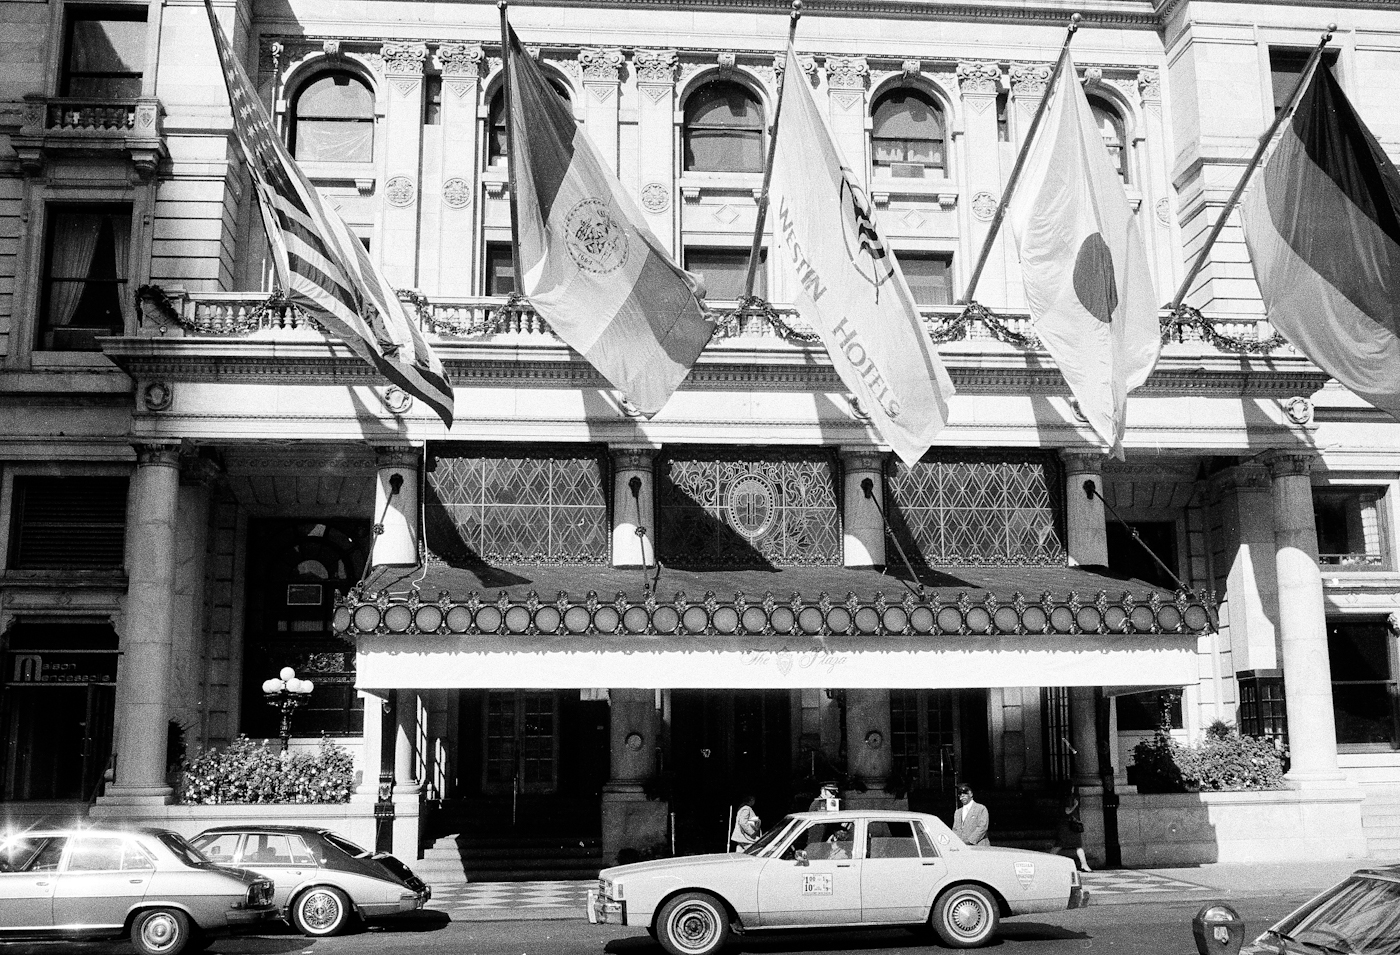 Flags fly over the main entrance of the Plaza Hotel in New York City in 1982. Suzanne Vlamis | AP